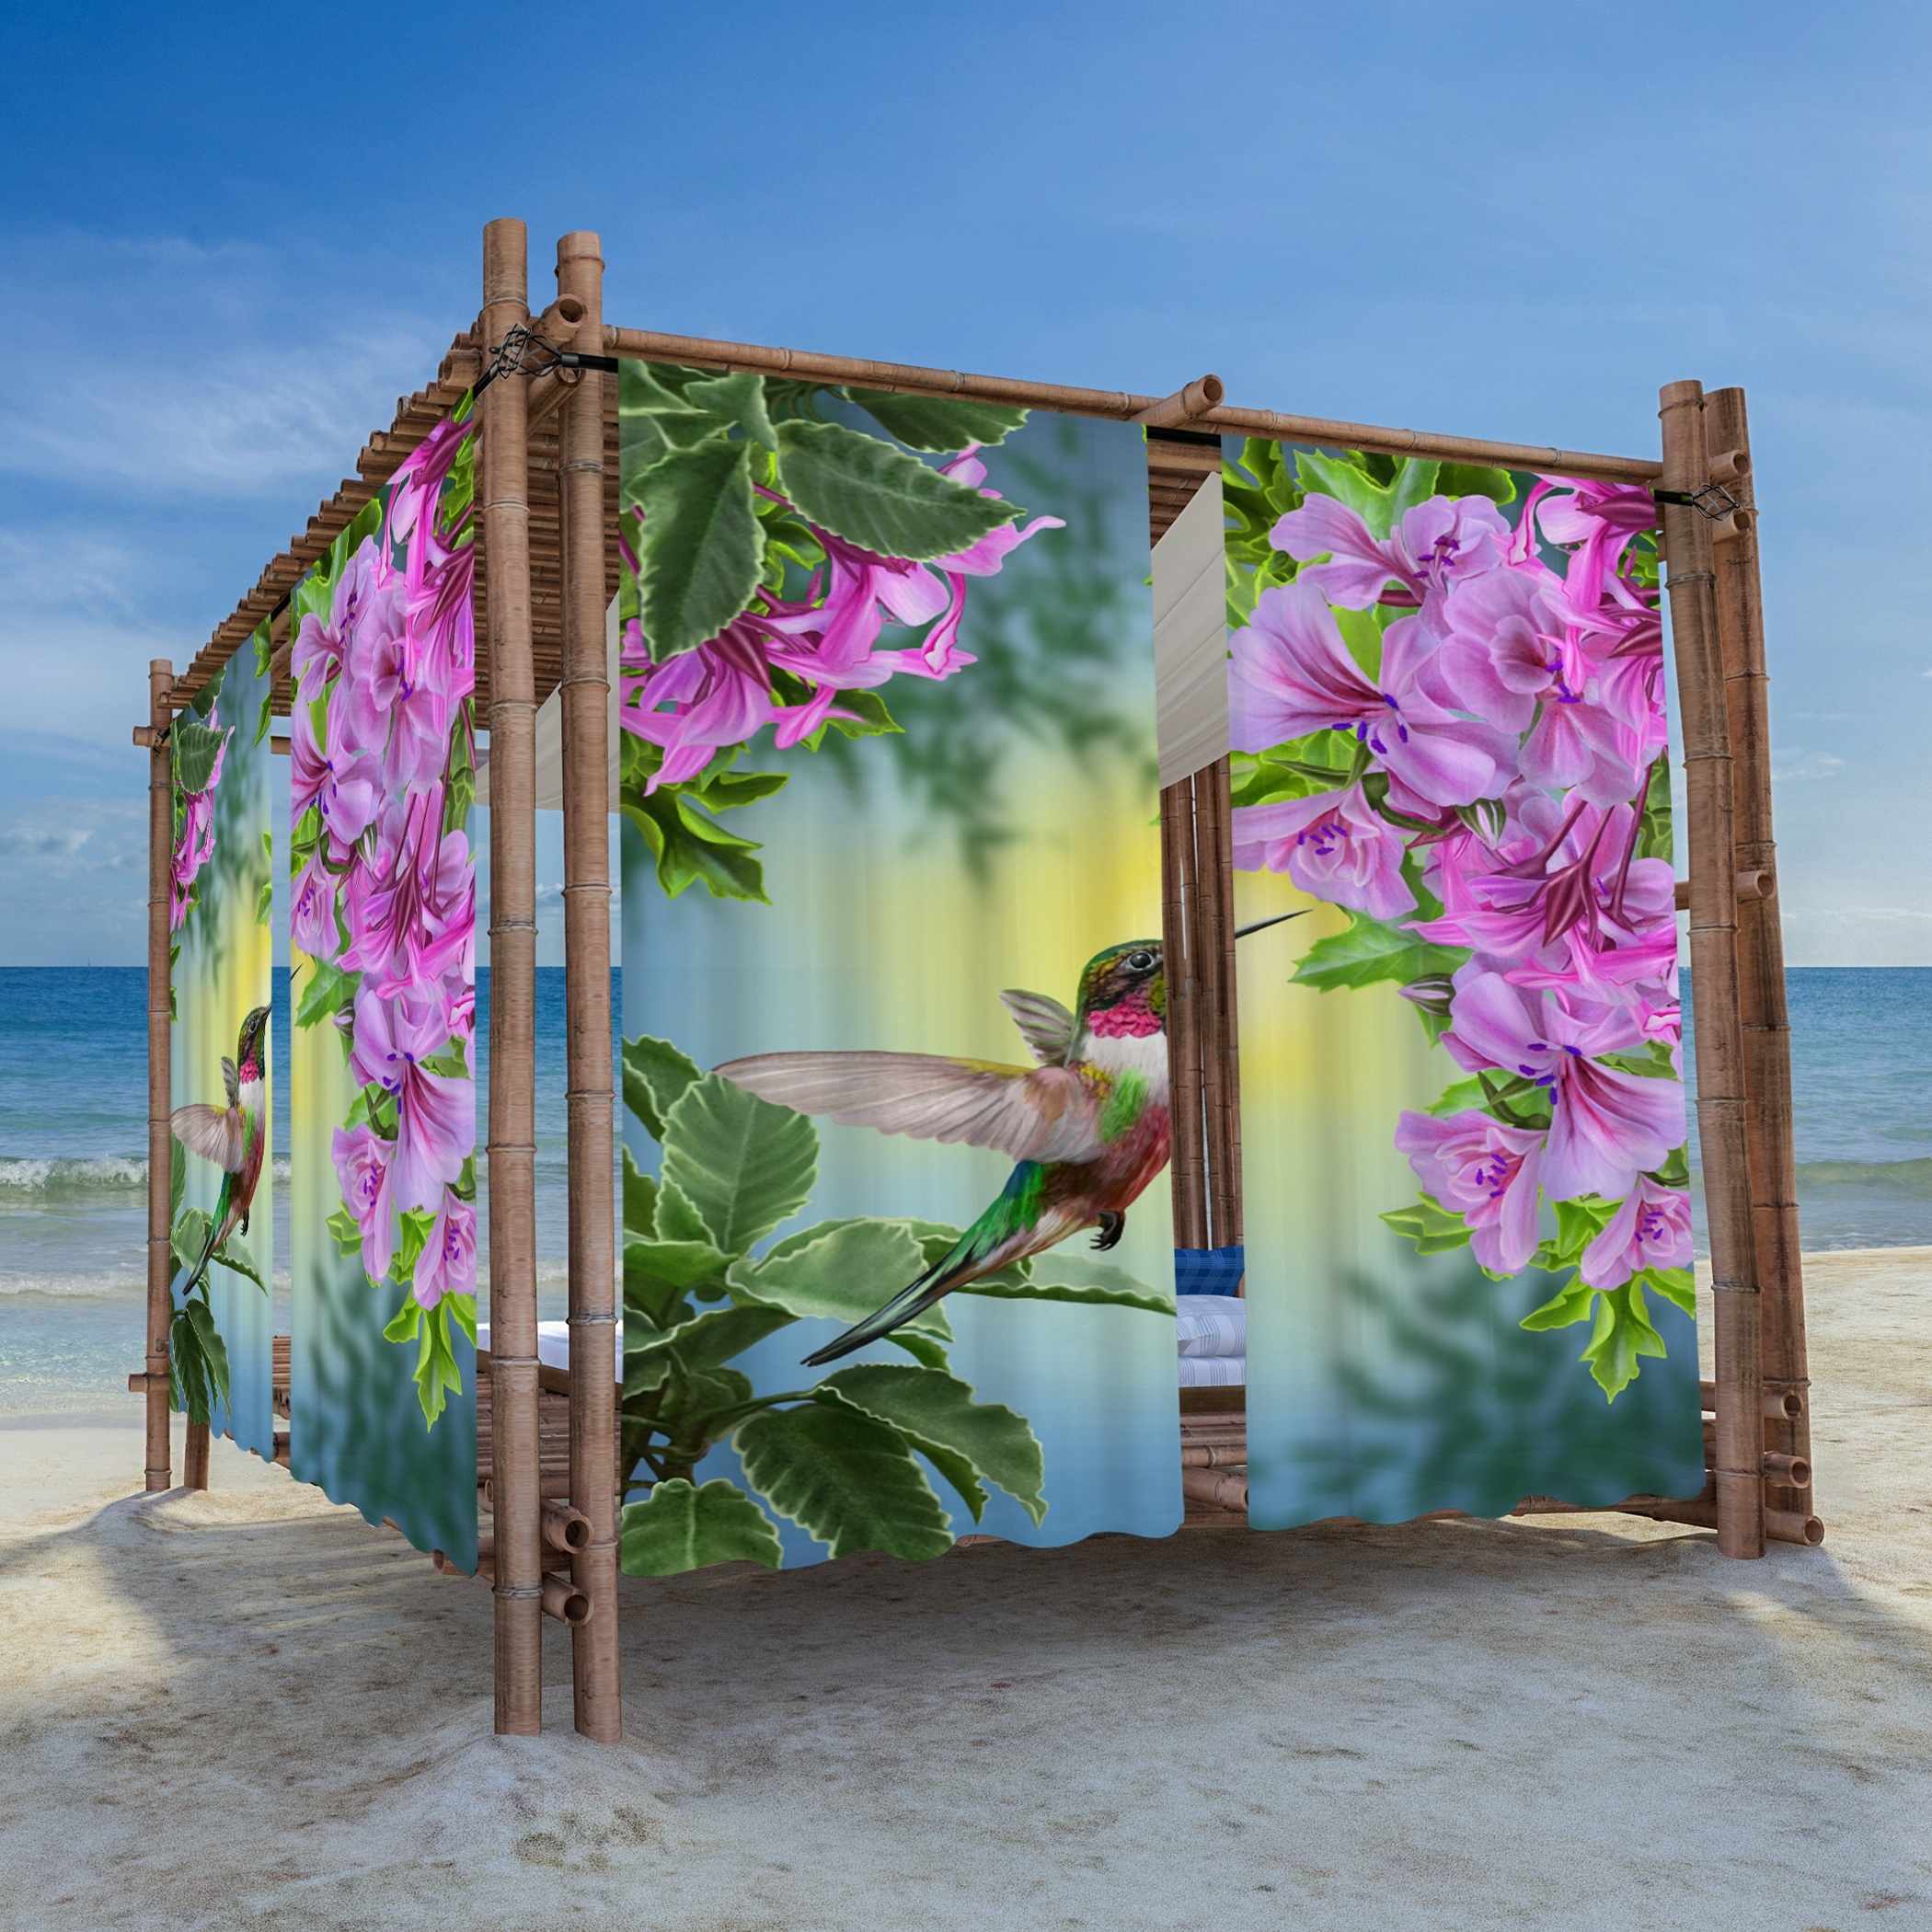 

Water-resistant Hummingbird And Flowers Printed Polyester Outdoor Curtains, 2 Panels Set, Contemporary Semi-sheer Patio Gazebo Drapes With Valance, Machine Washable, Decorative Garden Windbreak